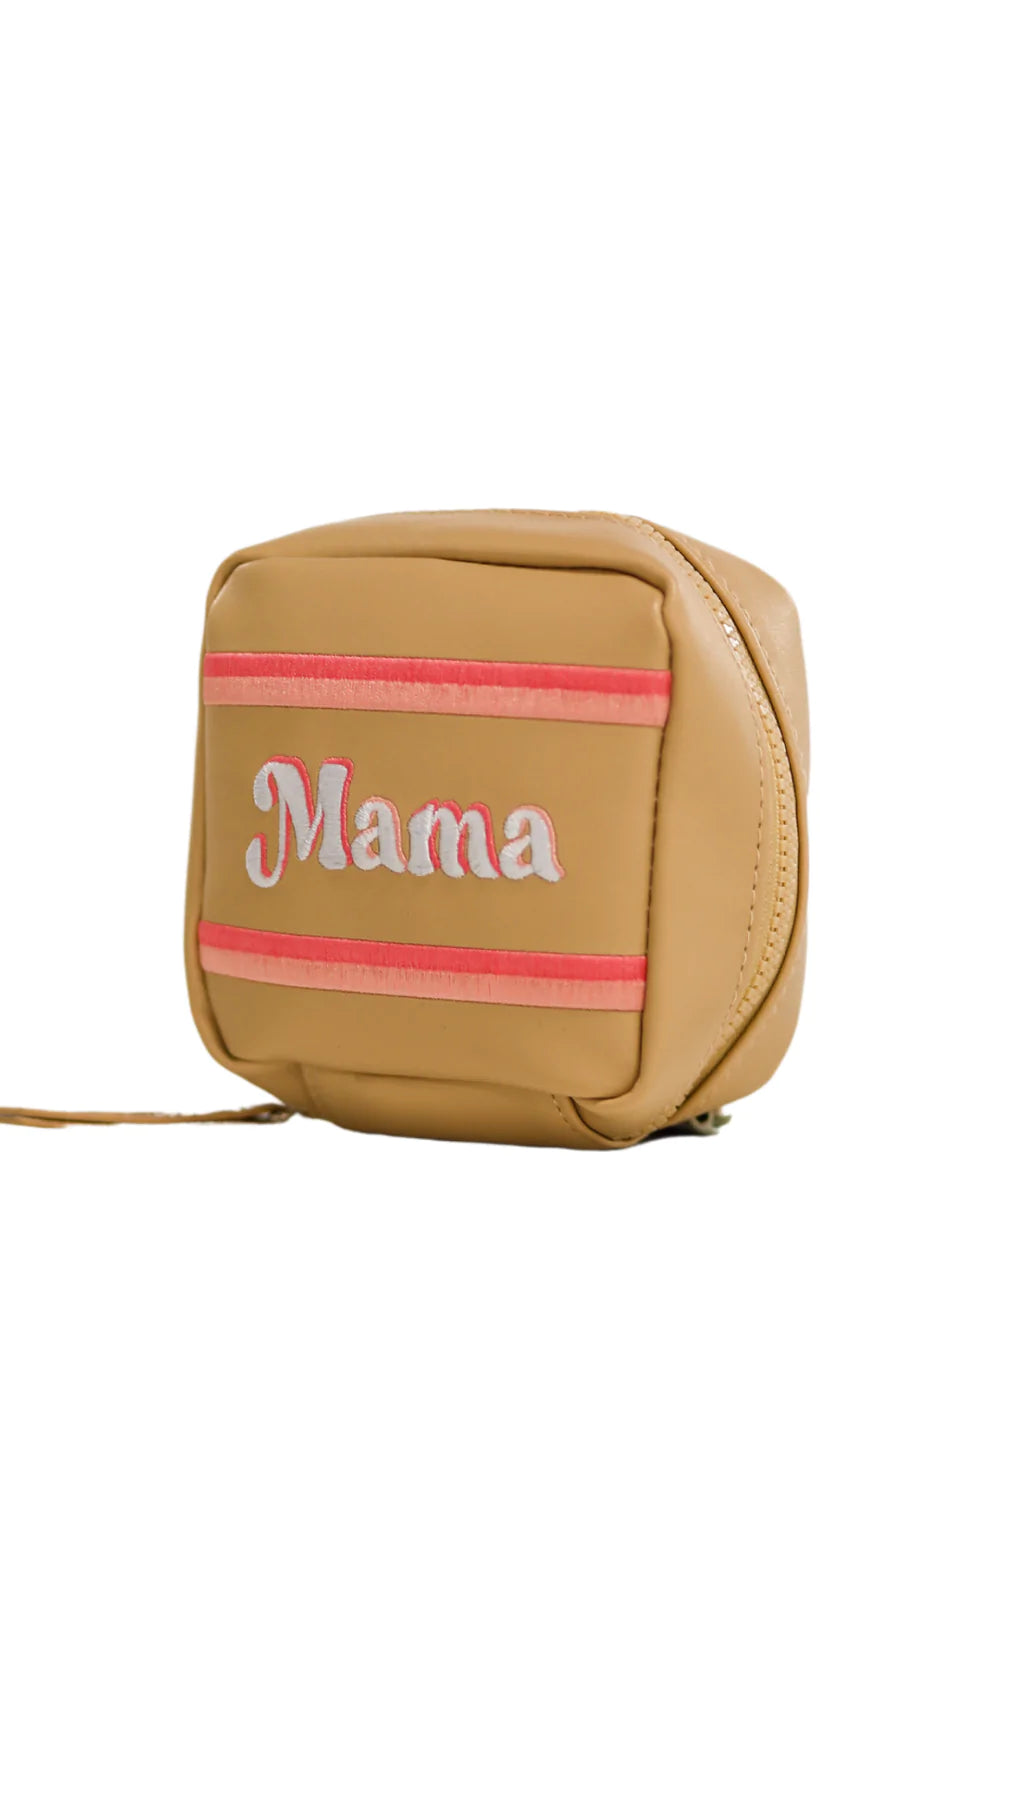 'Mama' Tan Travel Pouch